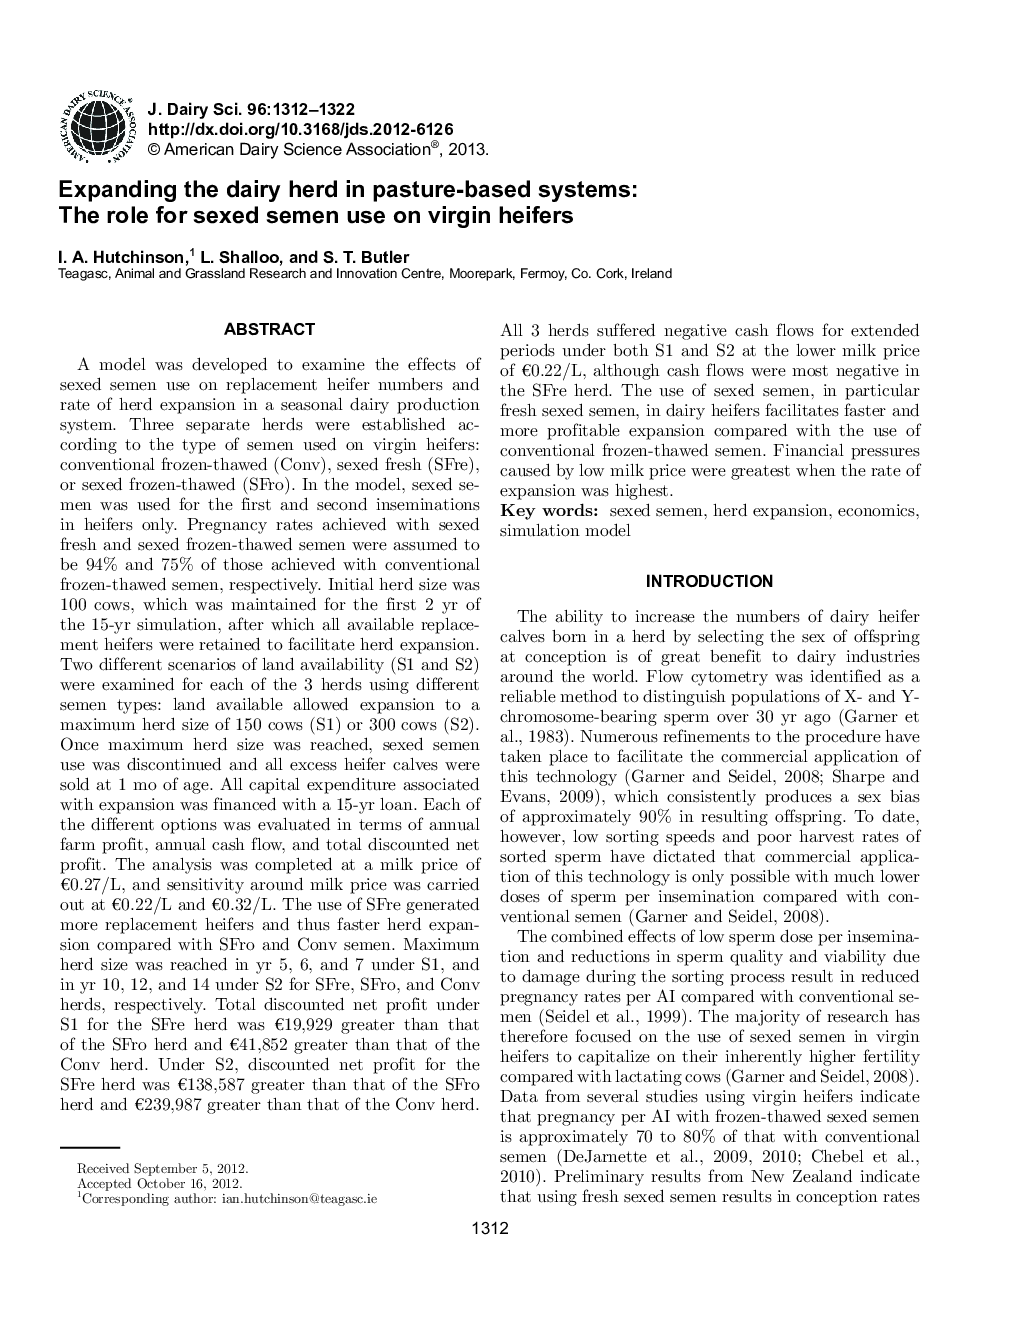 Expanding the dairy herd in pasture-based systems: The role for sexed semen use on virgin heifers